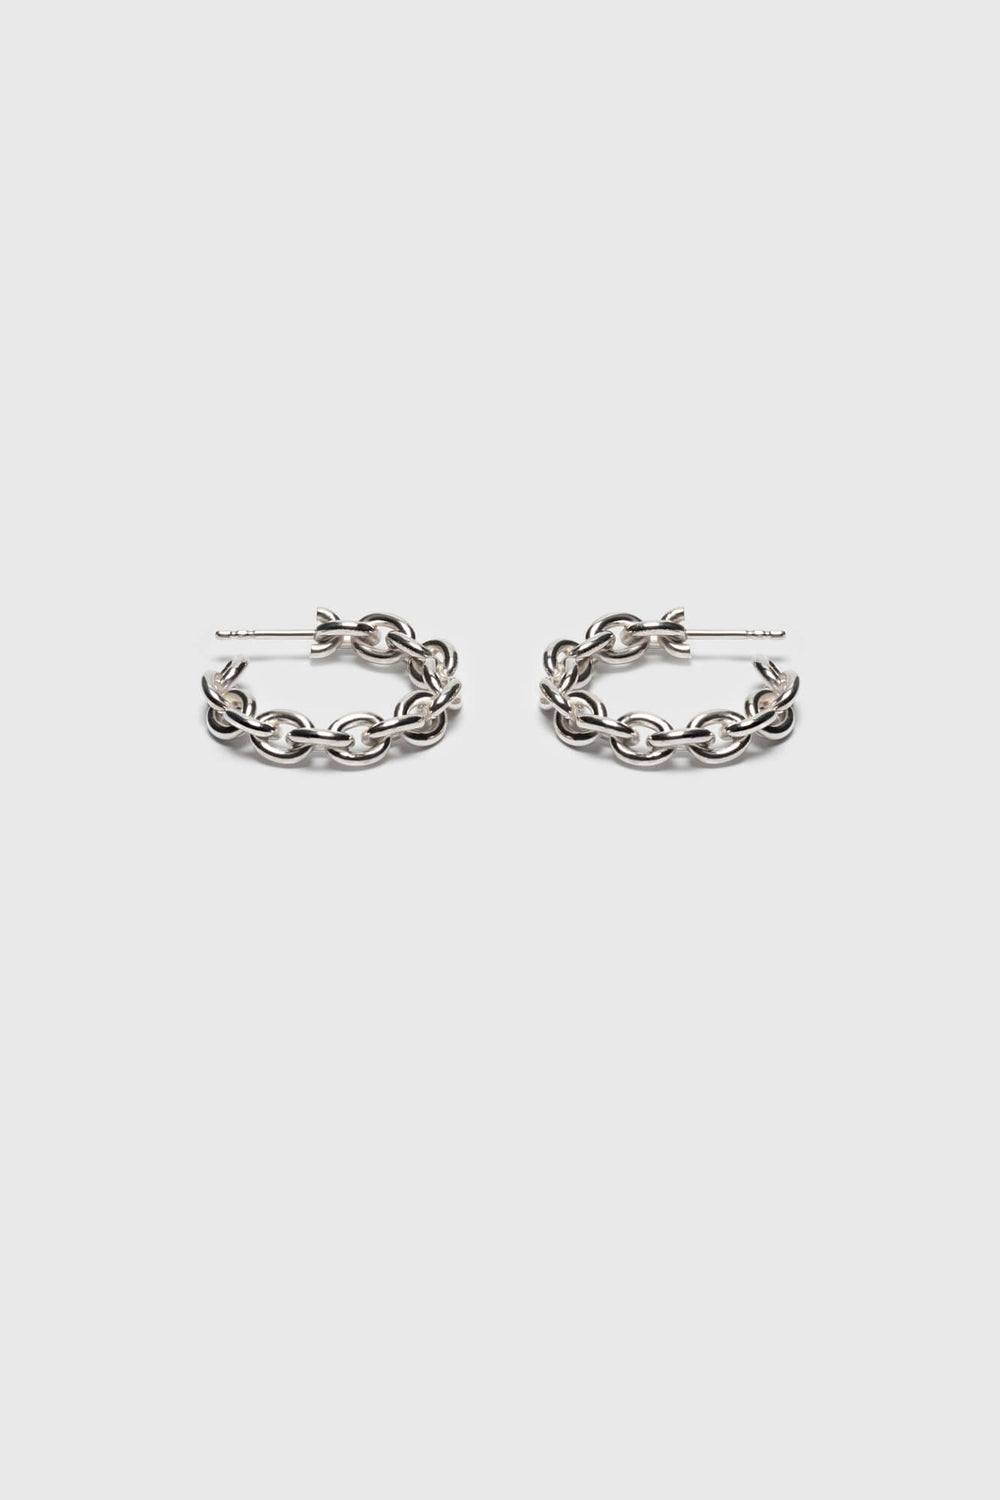 Link chain earrings with a high gloss finish. Fine jewelry handmade in Berlin.